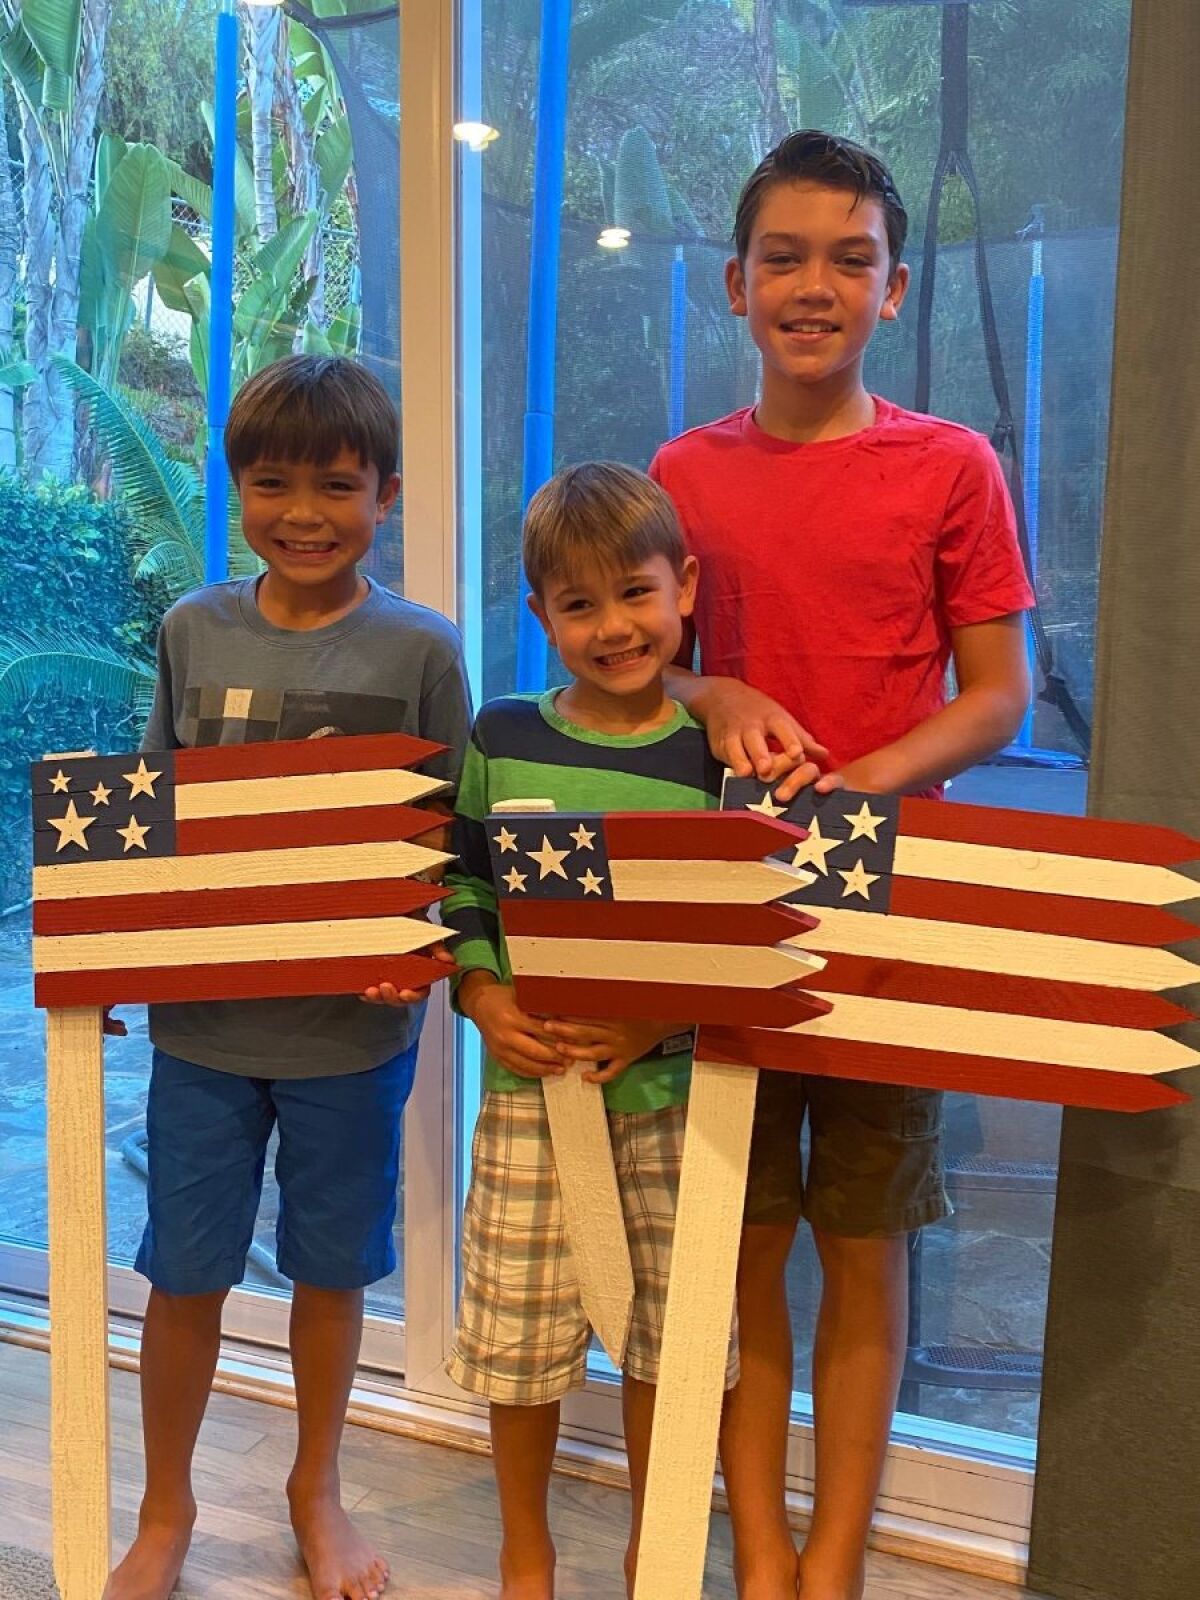 Nadine Utz says her sons Mason, 9, A.J., 6, and Wesley, 11, started assembling and painting wooden flags in June.